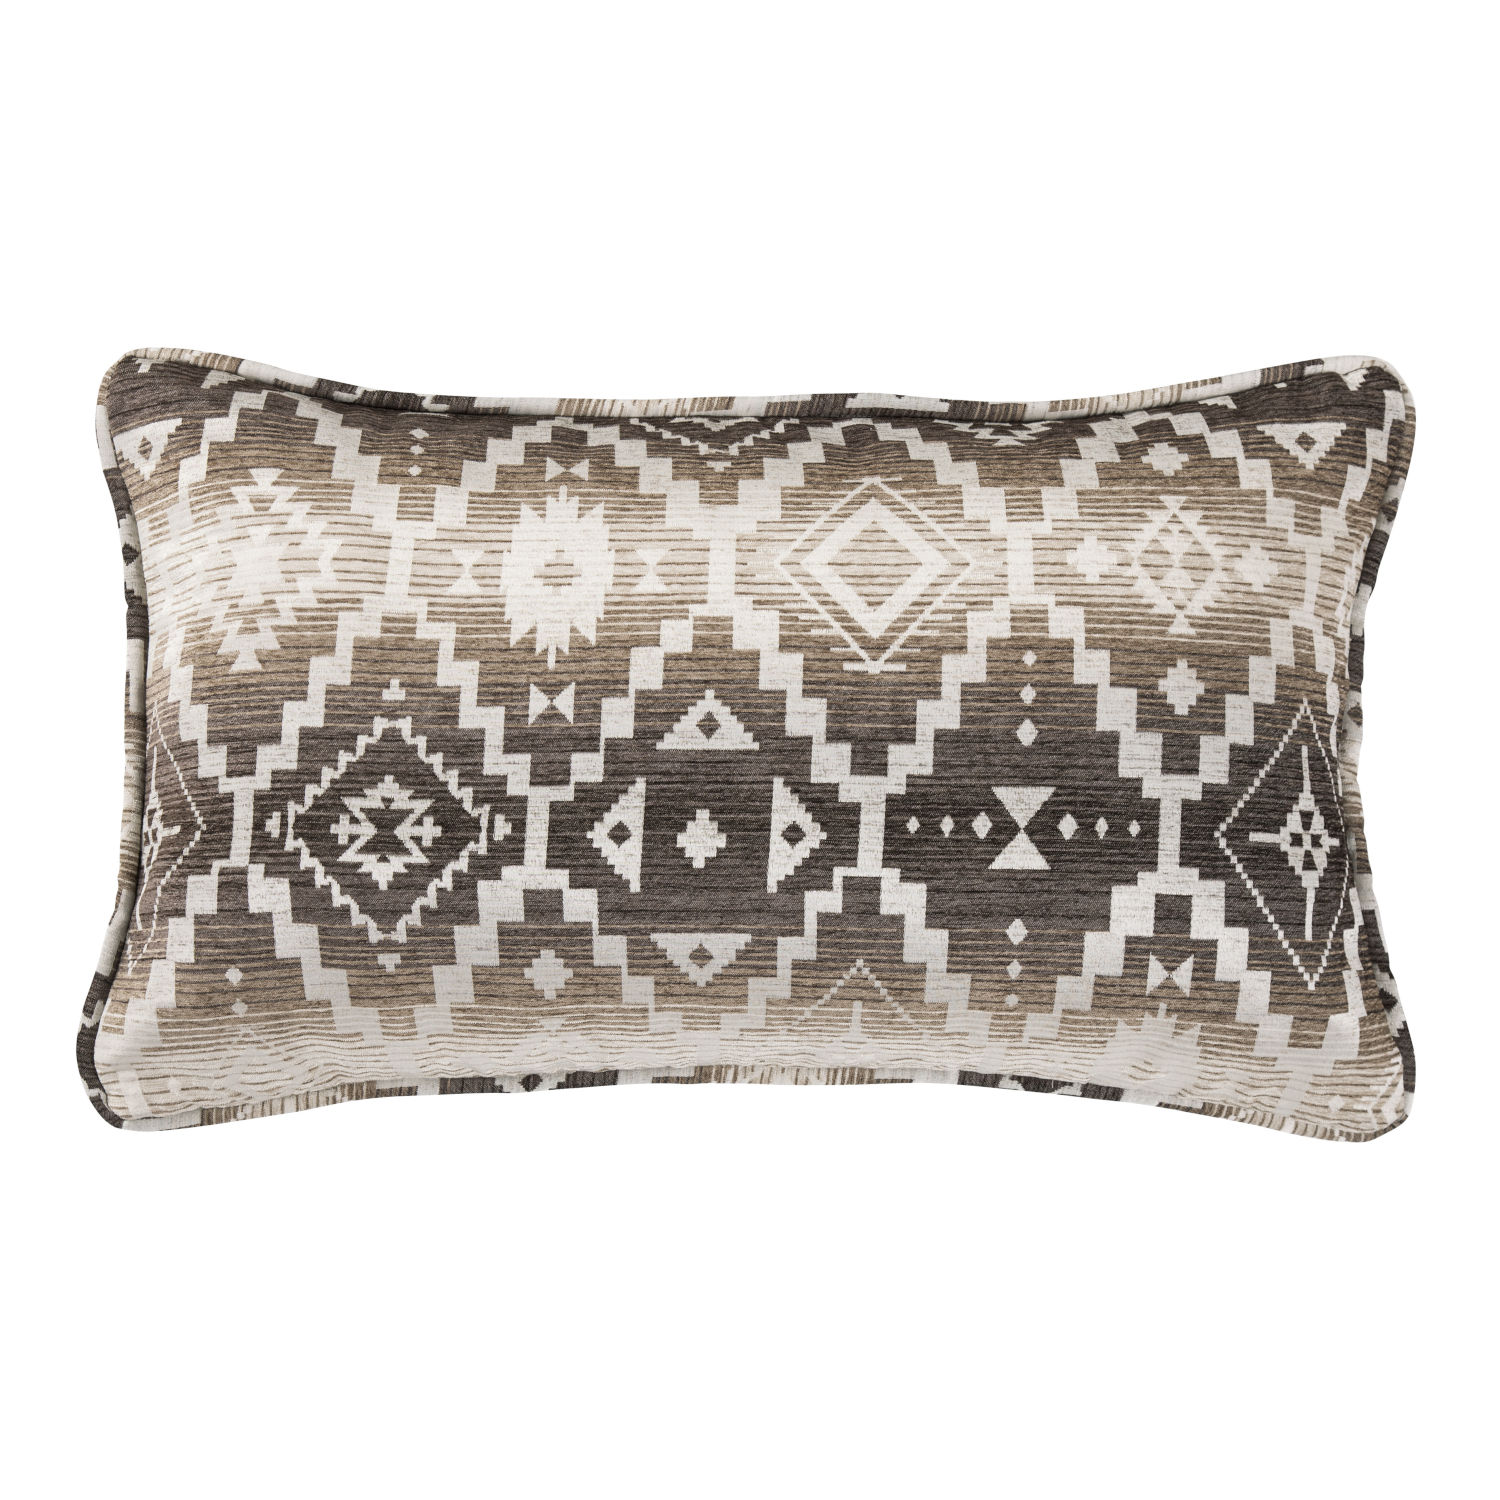 Throw Pillows Category